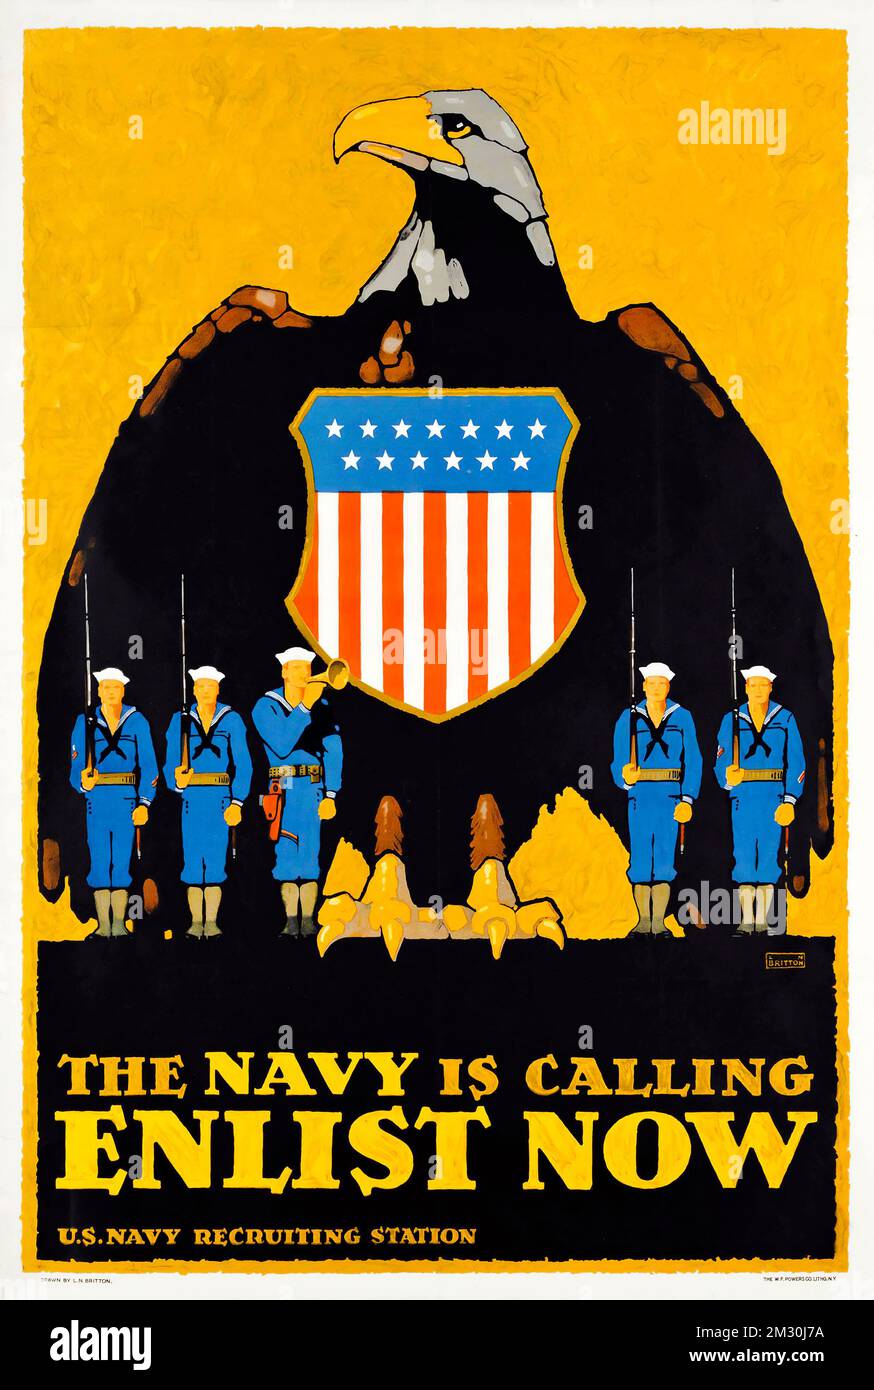 Recruitment poster USA - L.N. Britton - ENLIST NOW, feat american eagle - US Navy Recruiting Station, World War I, 1917 Stock Photo